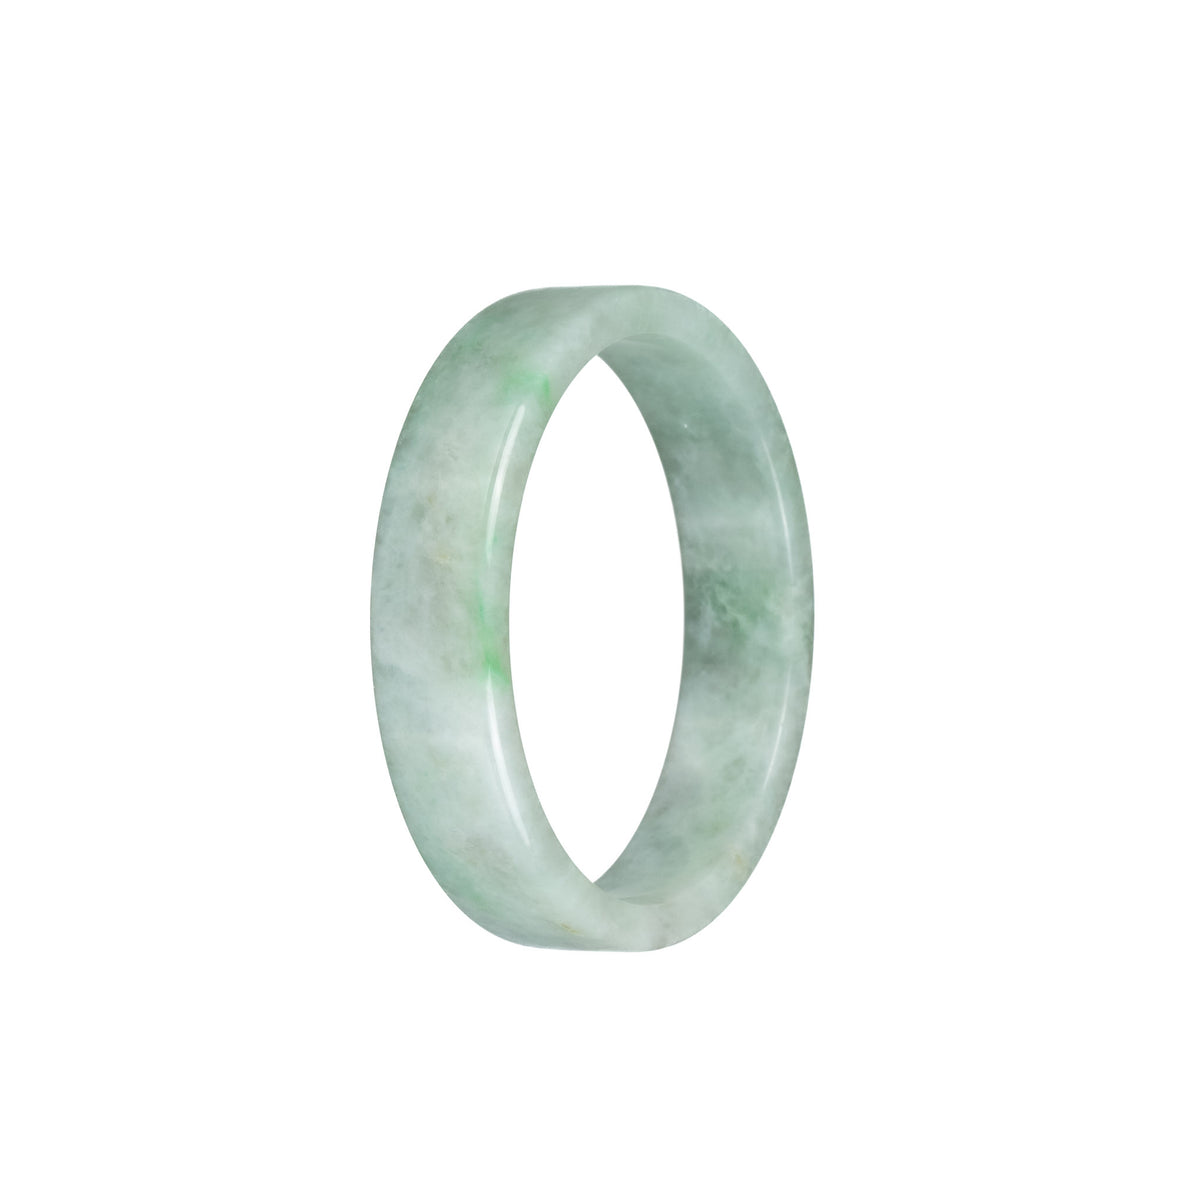 Real Untreated Pale Green with Green Pattern Jade Bangle Bracelet - 52mm Flat